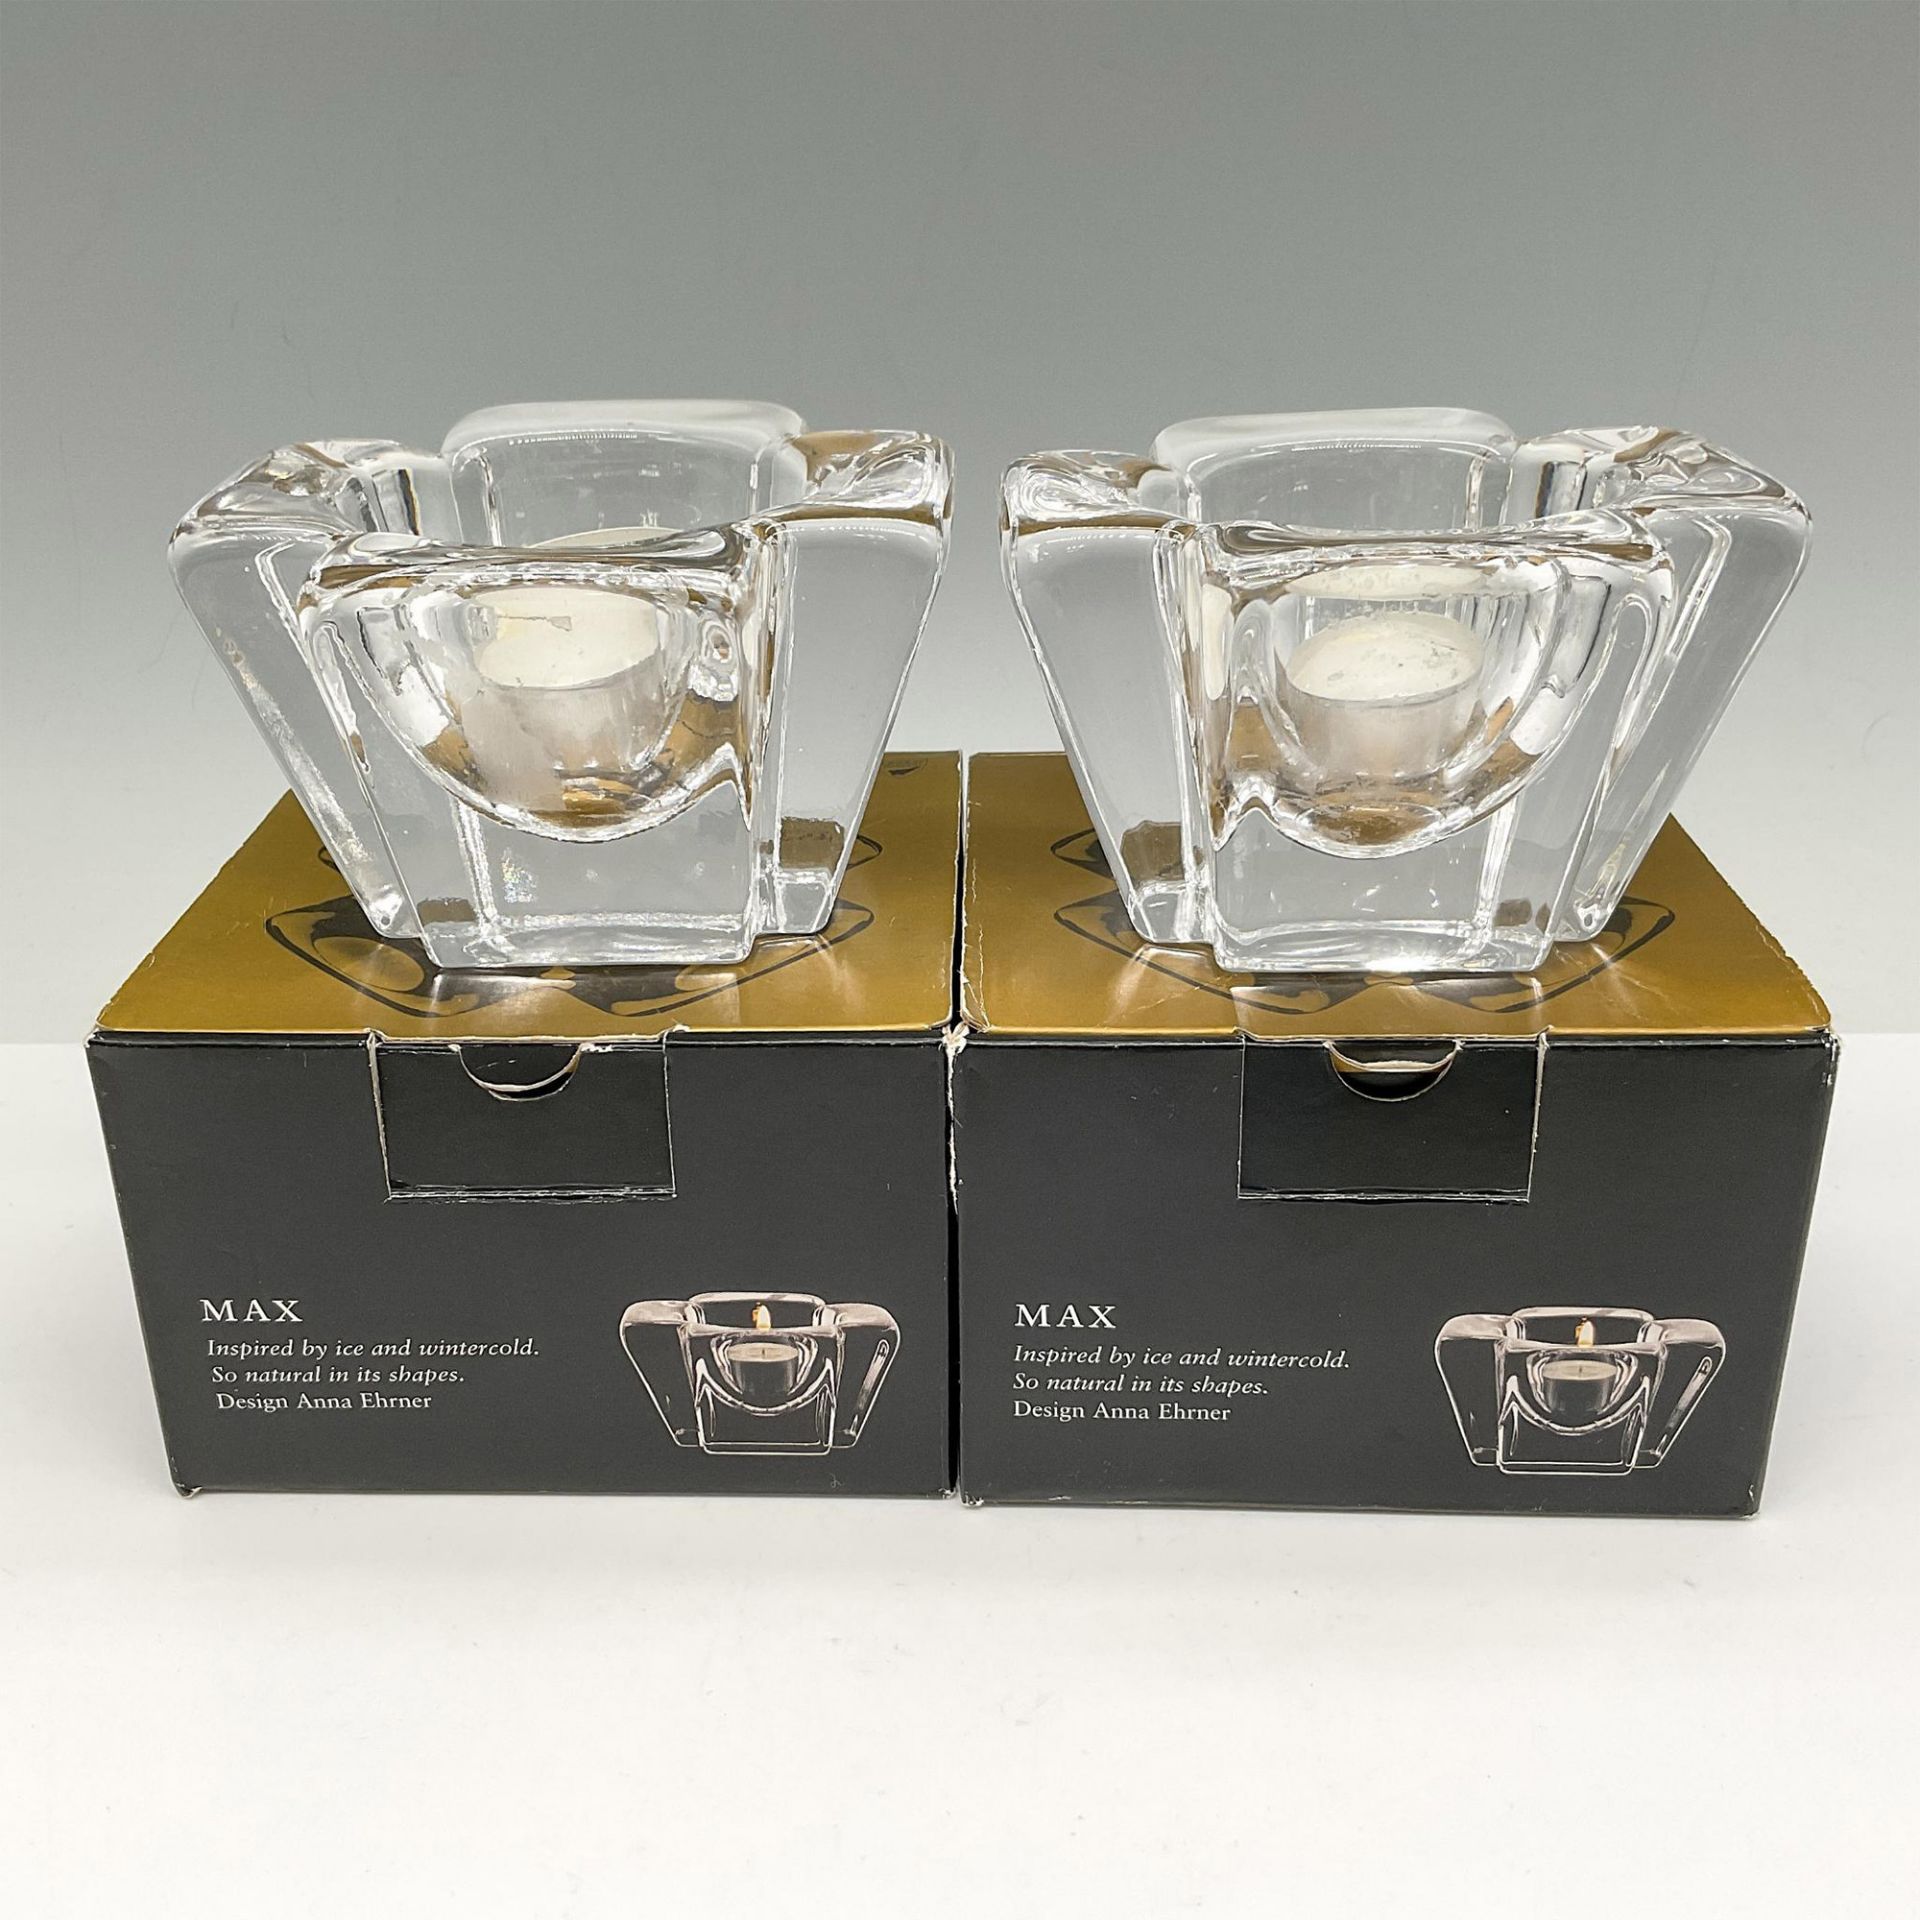 2pc Orrefors Crystal Candle Holders, Max - Bild 4 aus 4